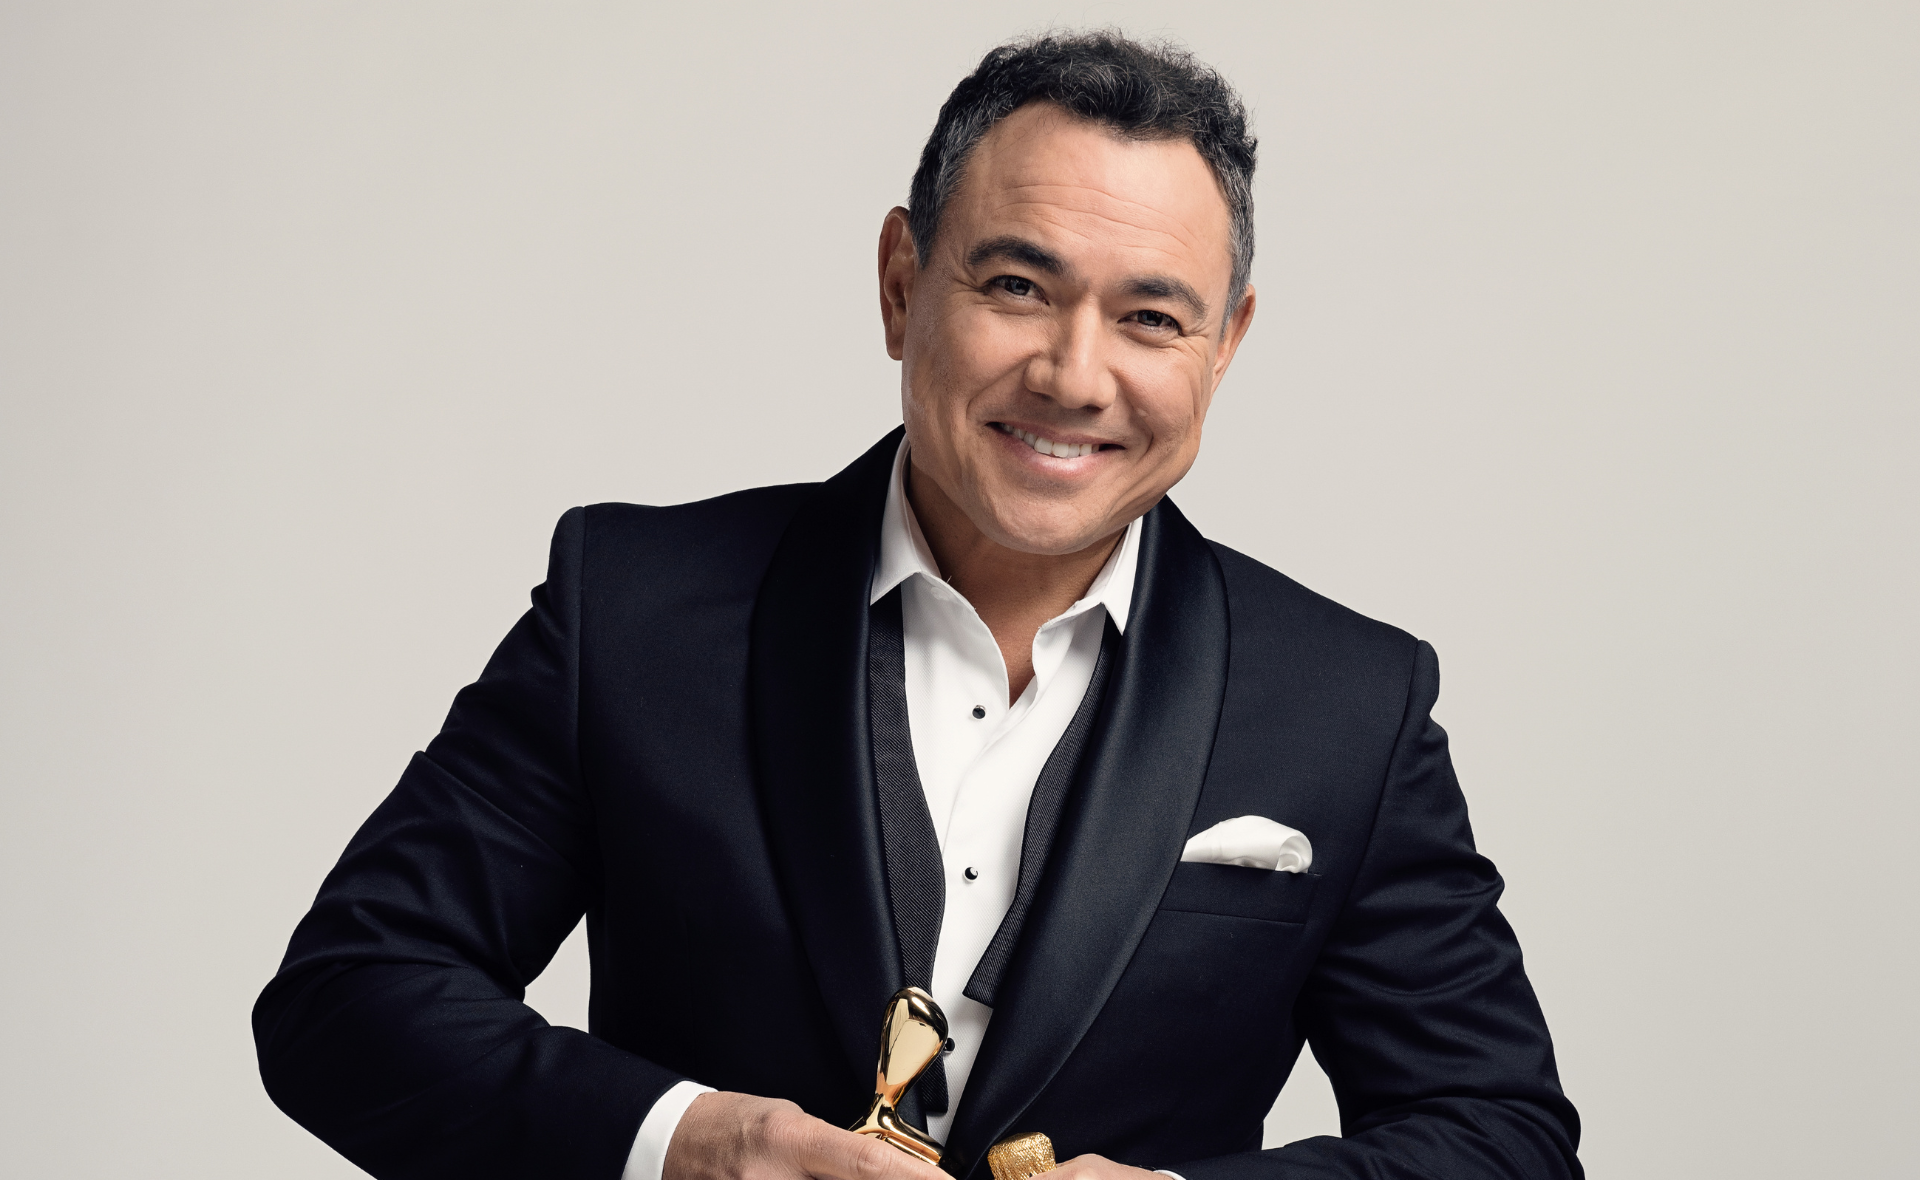 Logies host Sam Pang leaves the stars in stitches with his hilarious opening monologue